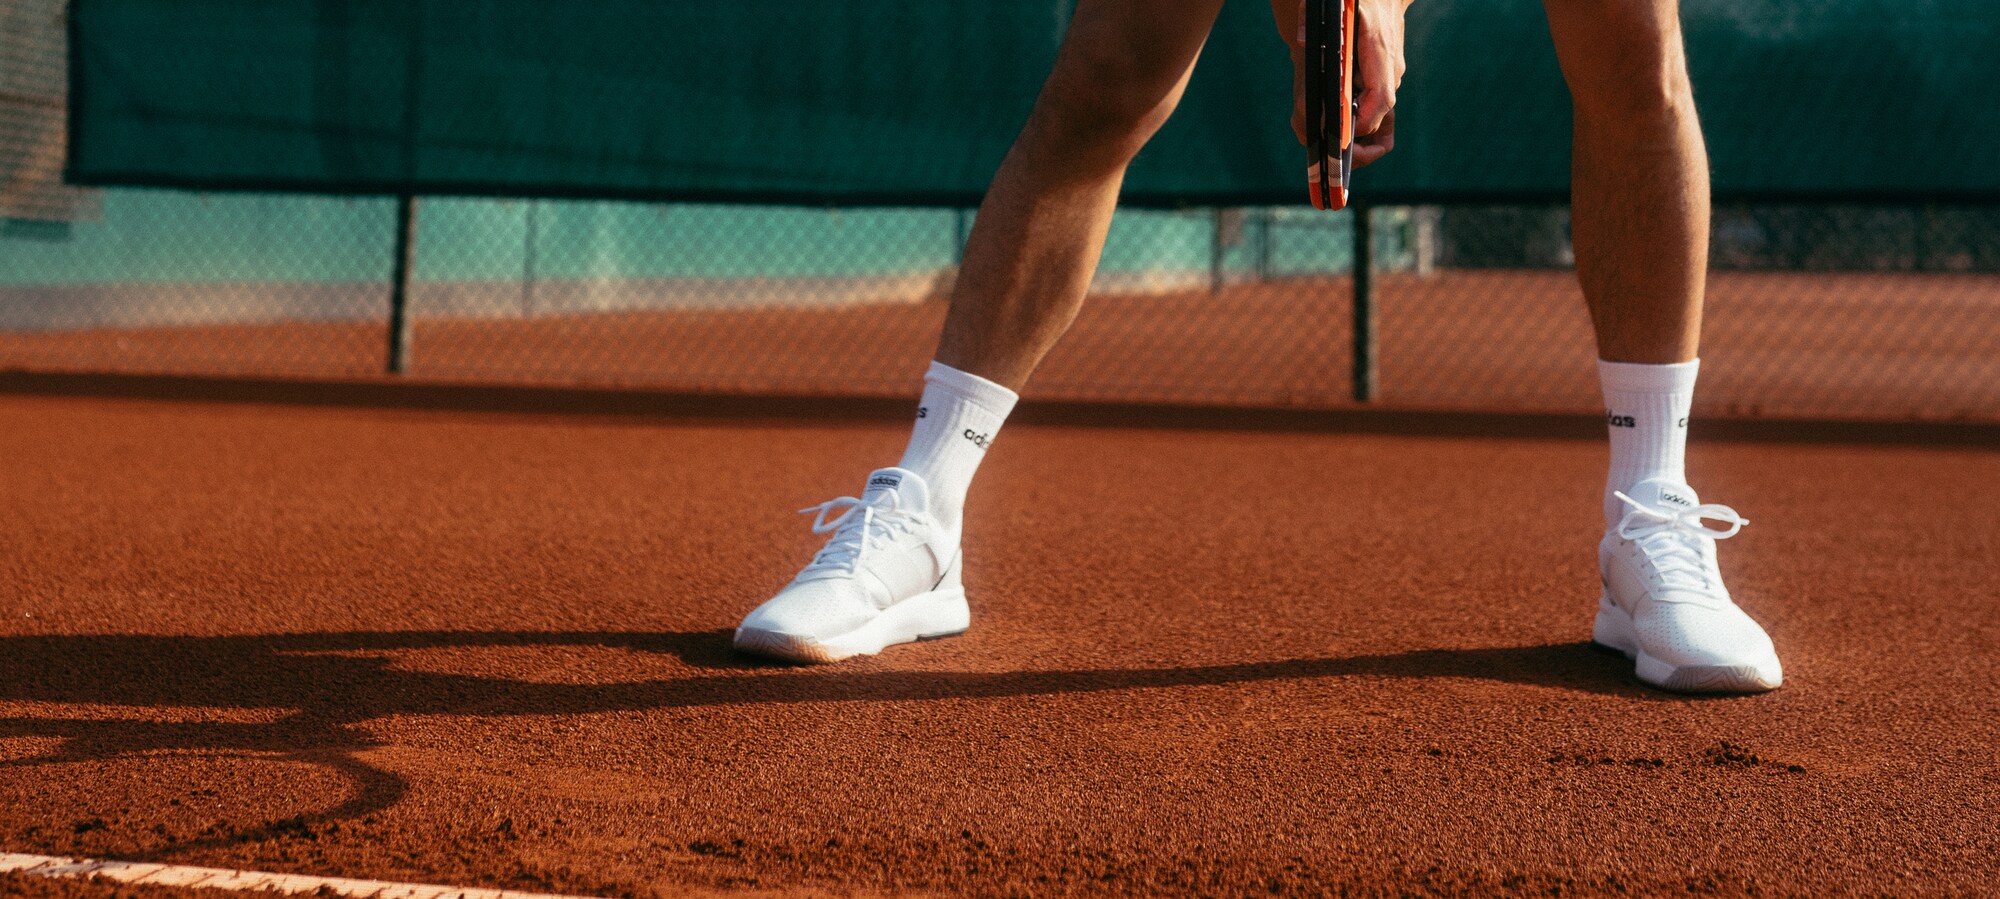 Game, set and match Tennis shoe guide